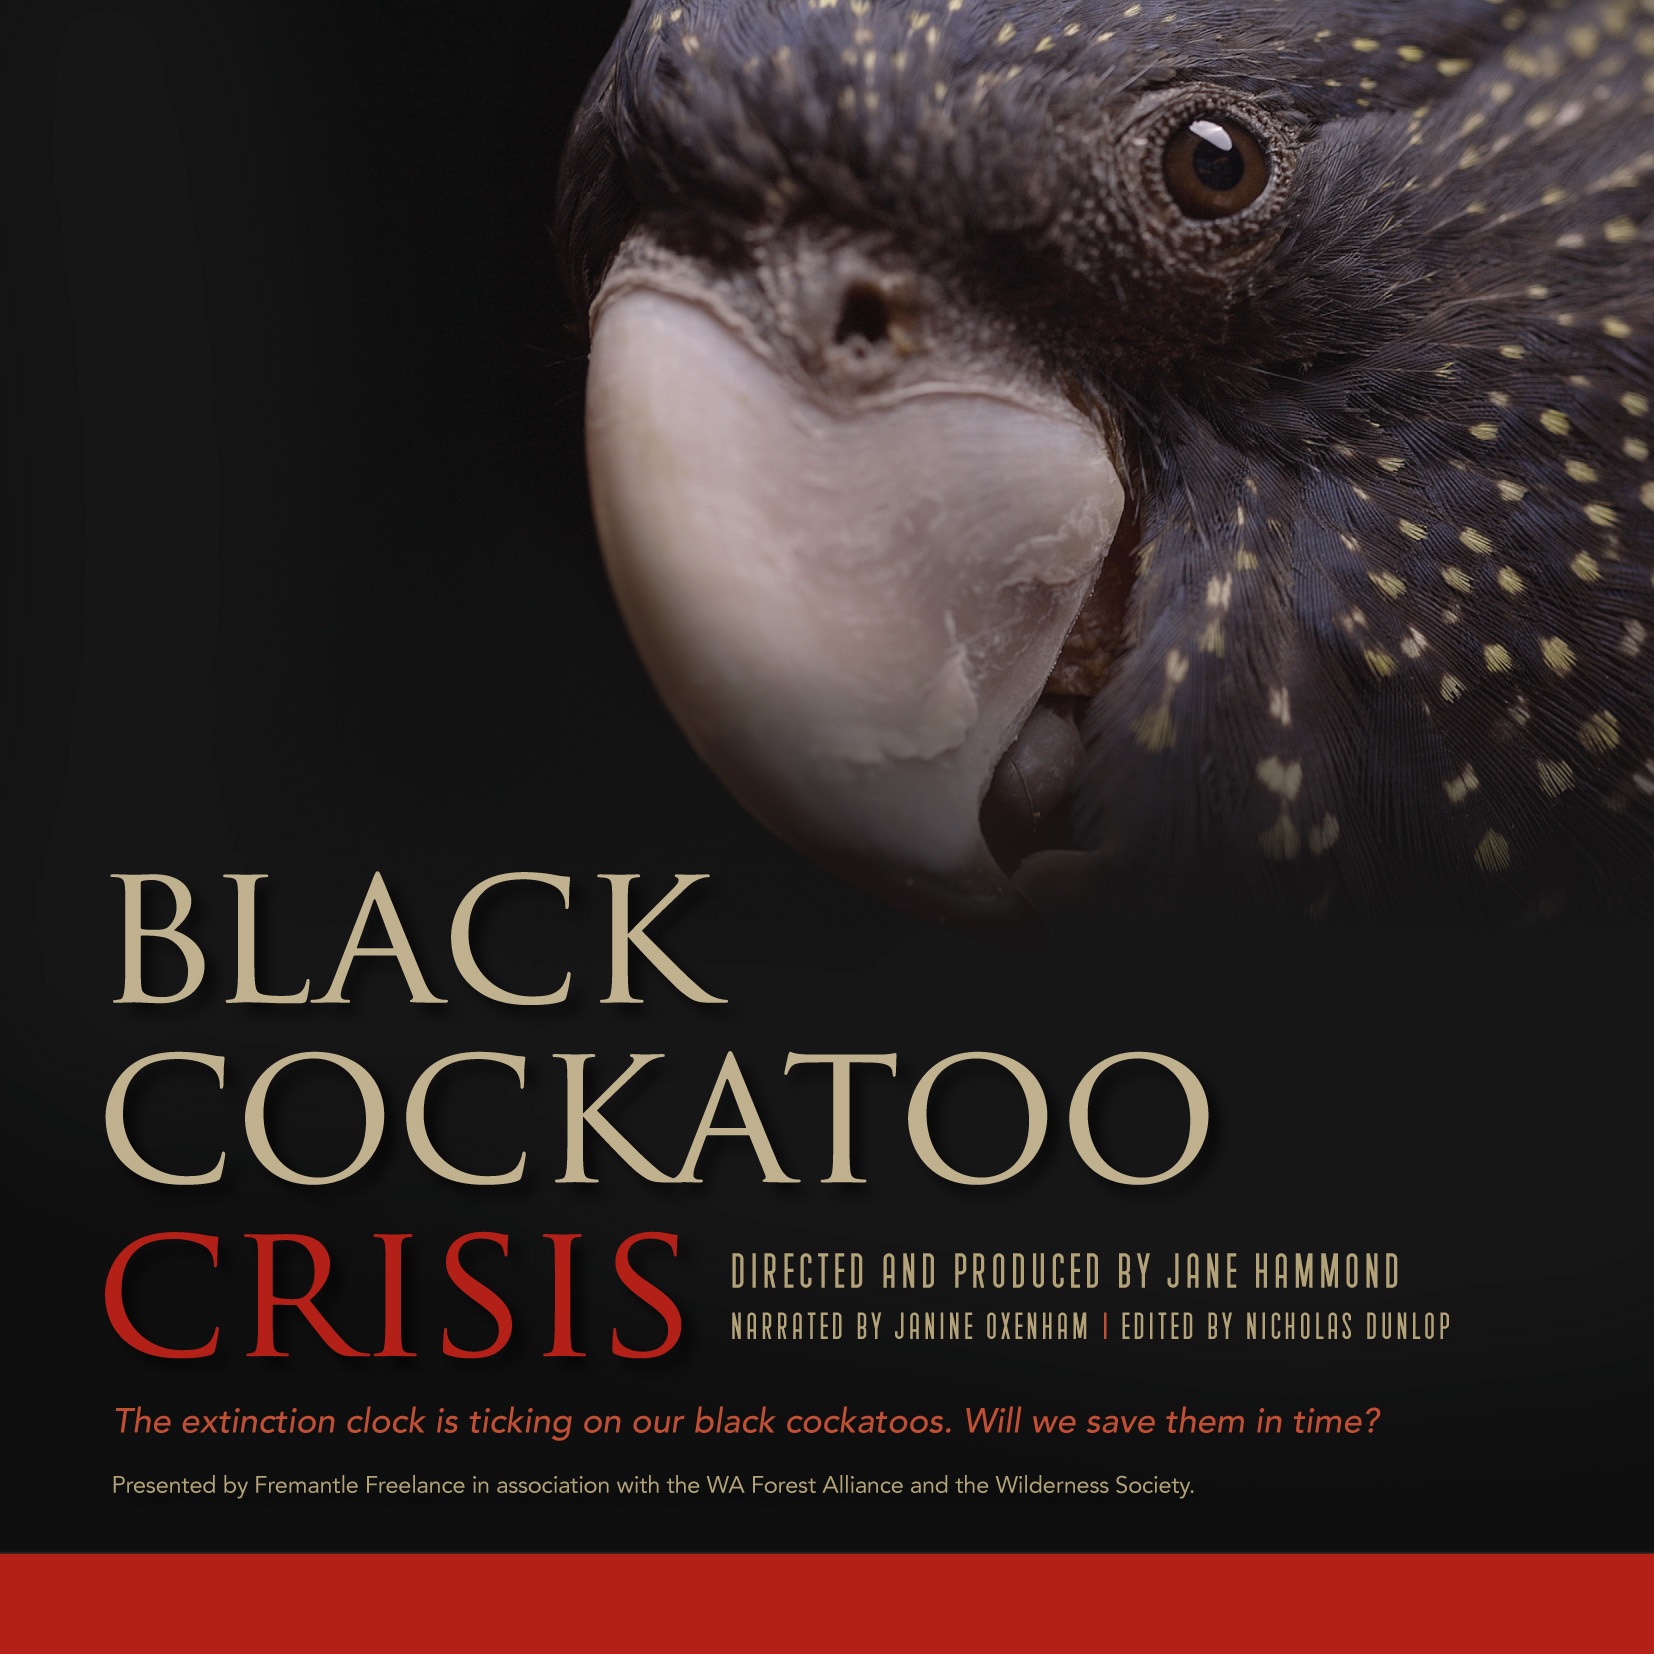 Black Cockatoo Crisis one of the films on at Tipping Point)